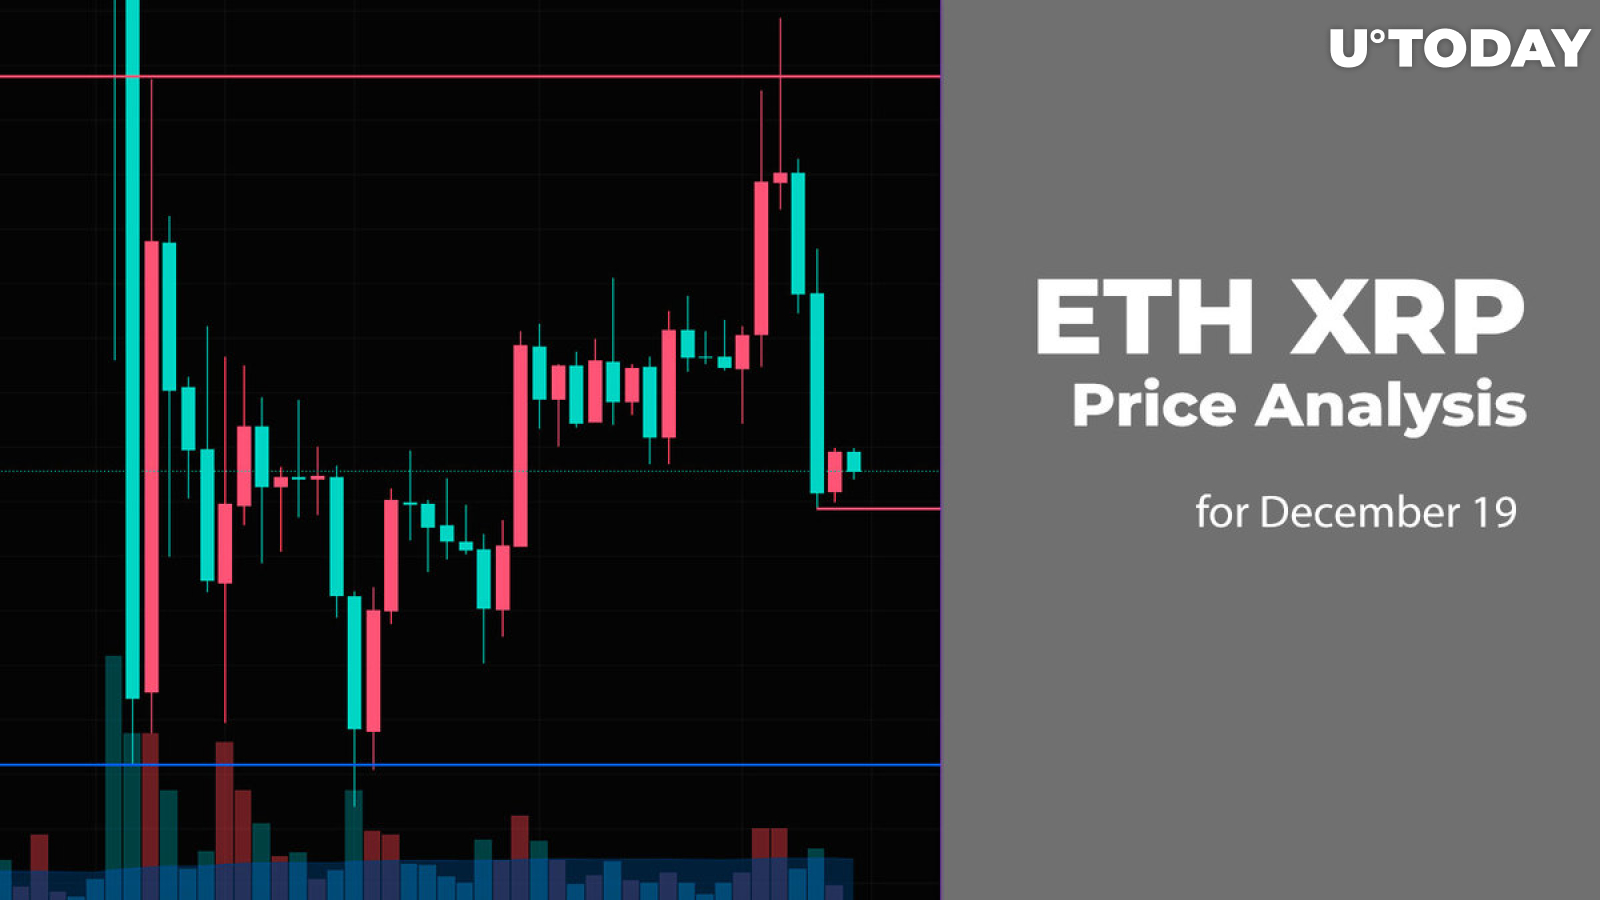 ETH and XRP Price Analysis for December 19